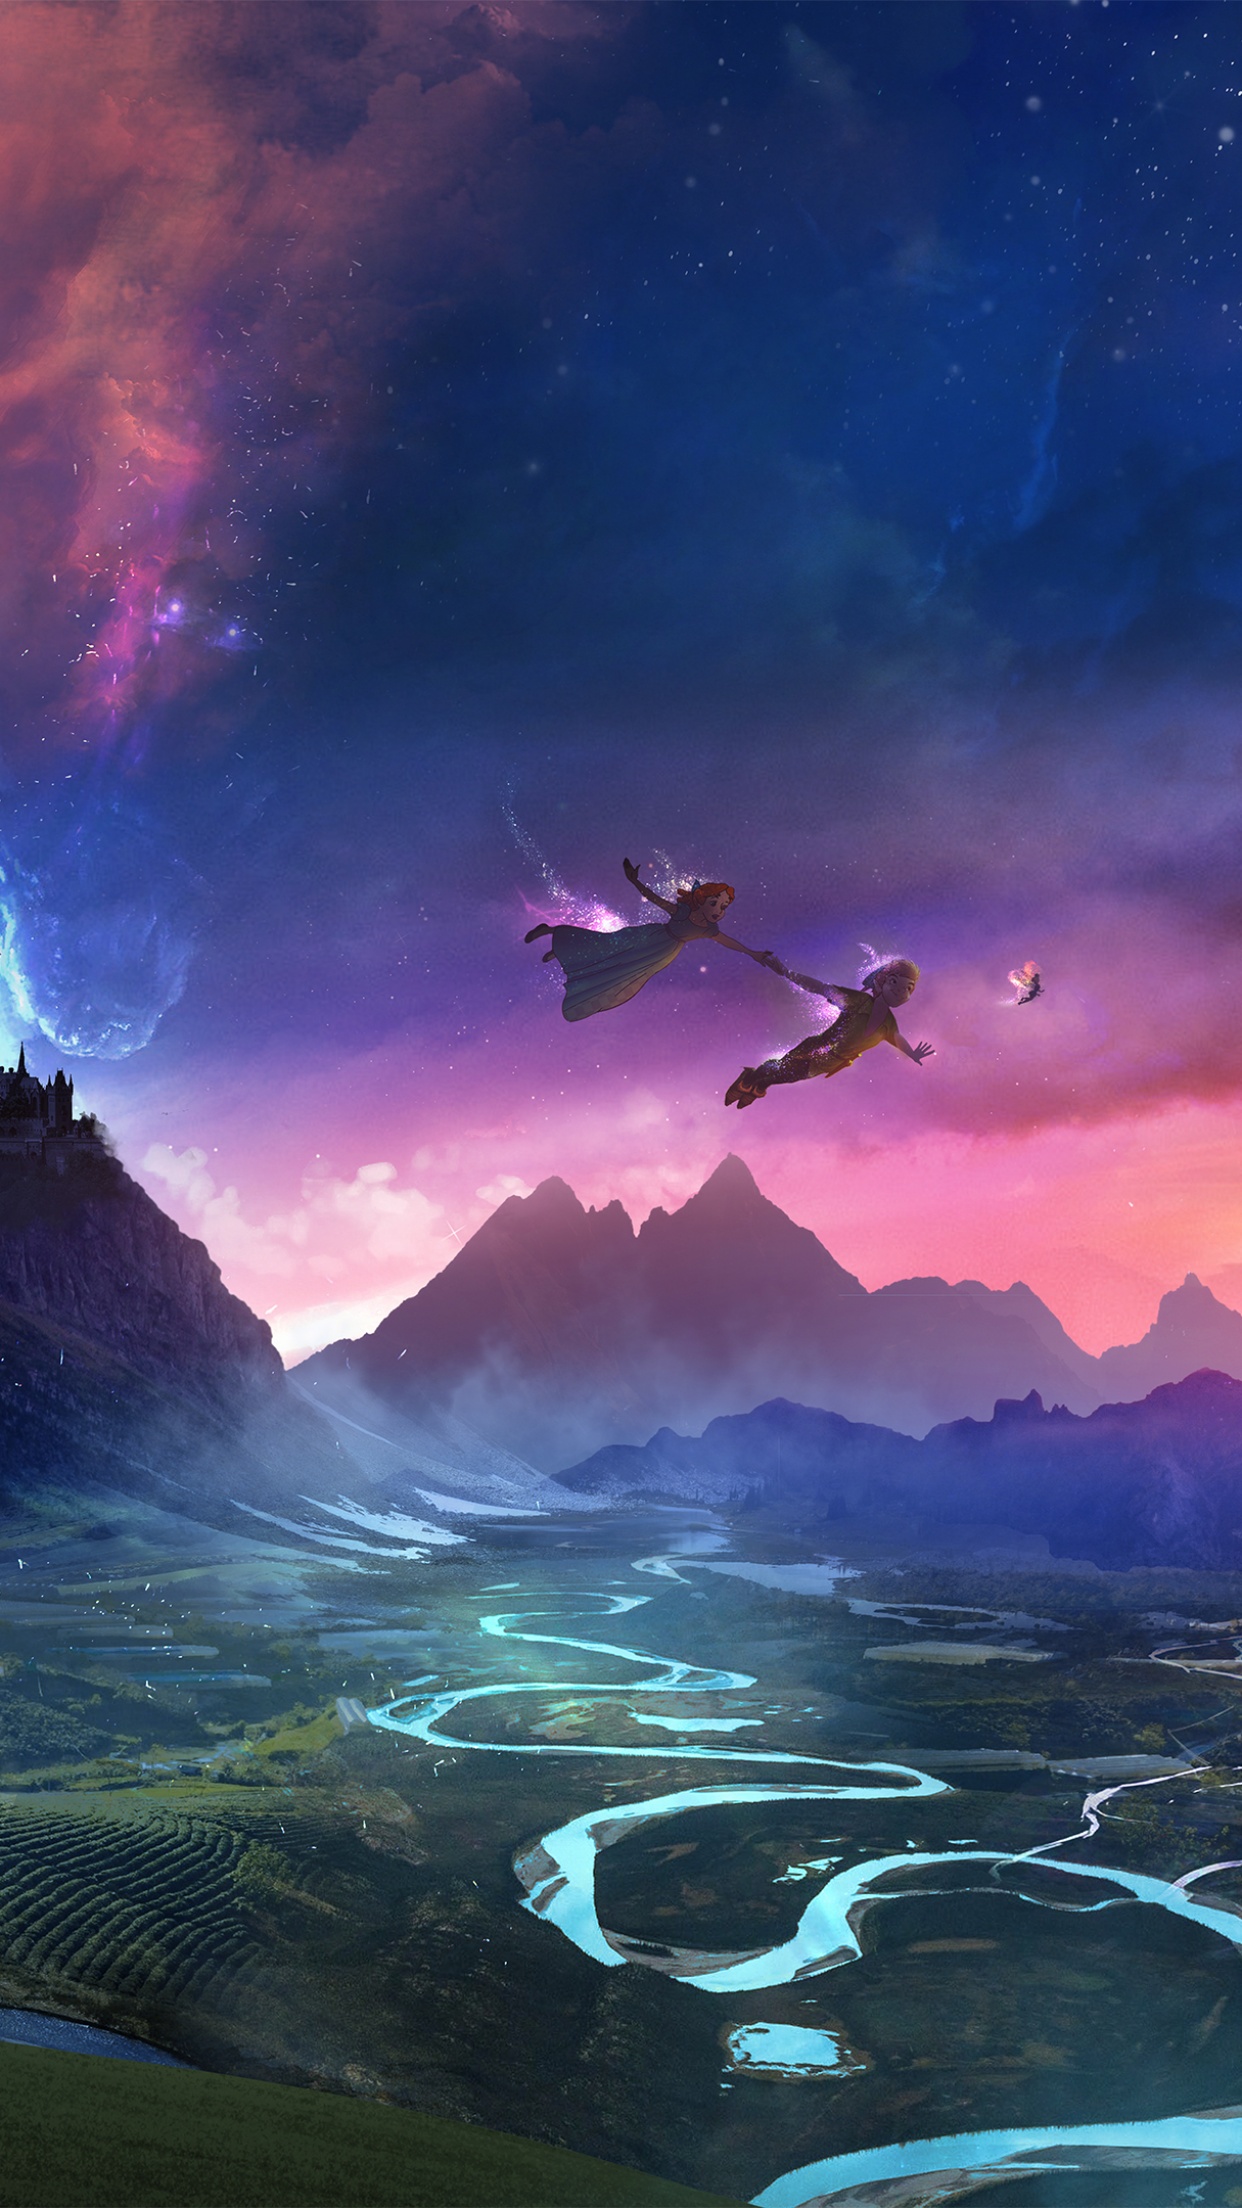 Dream 4K Wallpaper, Flying together, Mountains, Evening, Dusk, Boy and